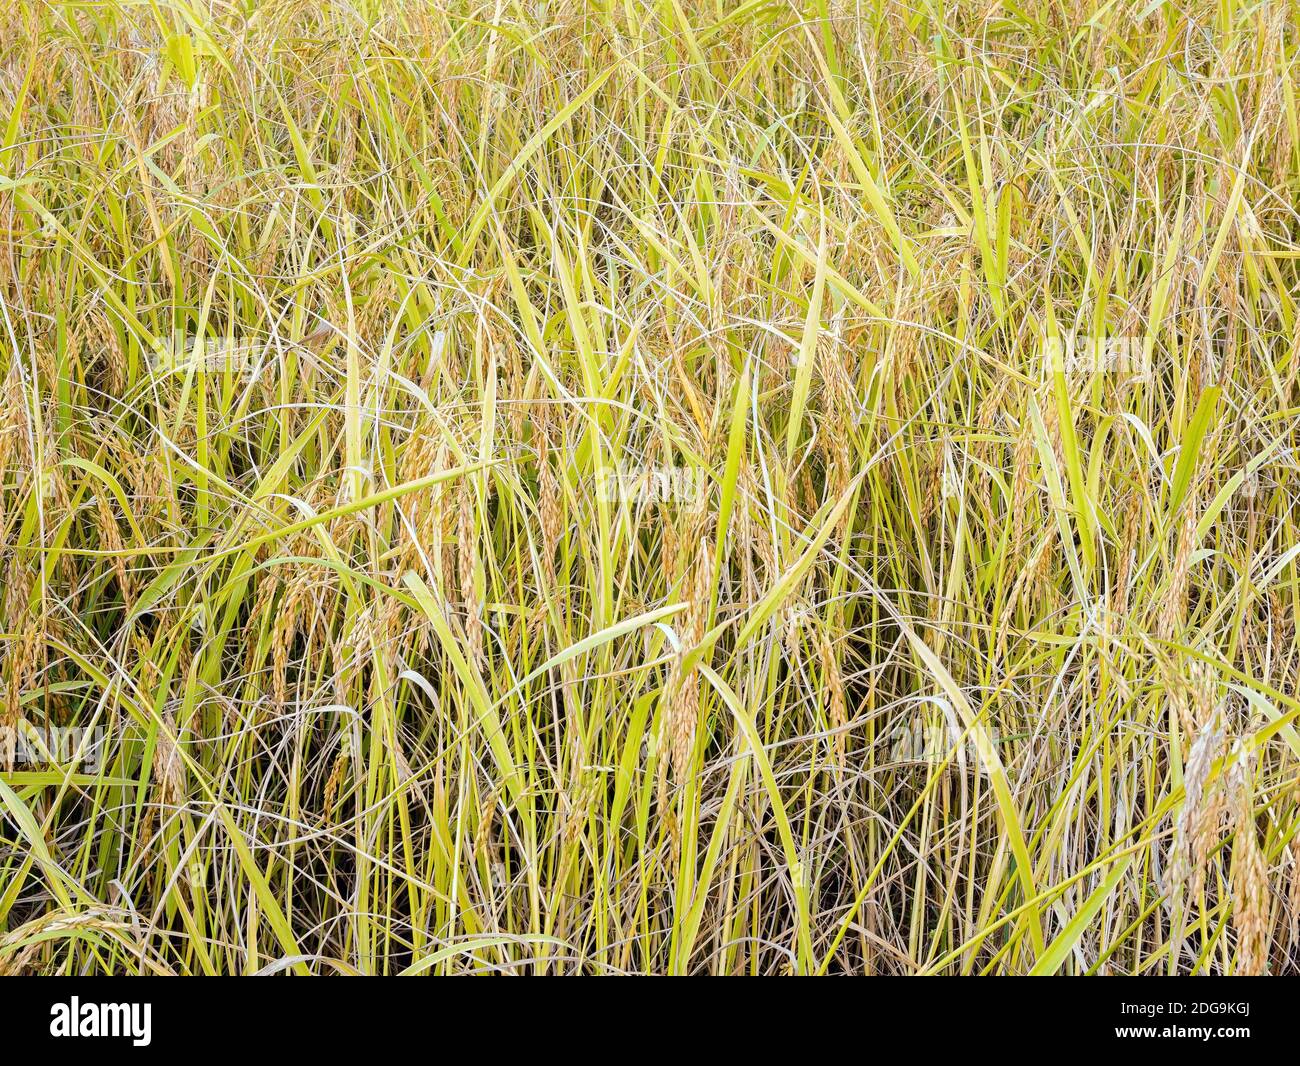 Golden yellow paddy in the fields ready for harvest Stock Photo